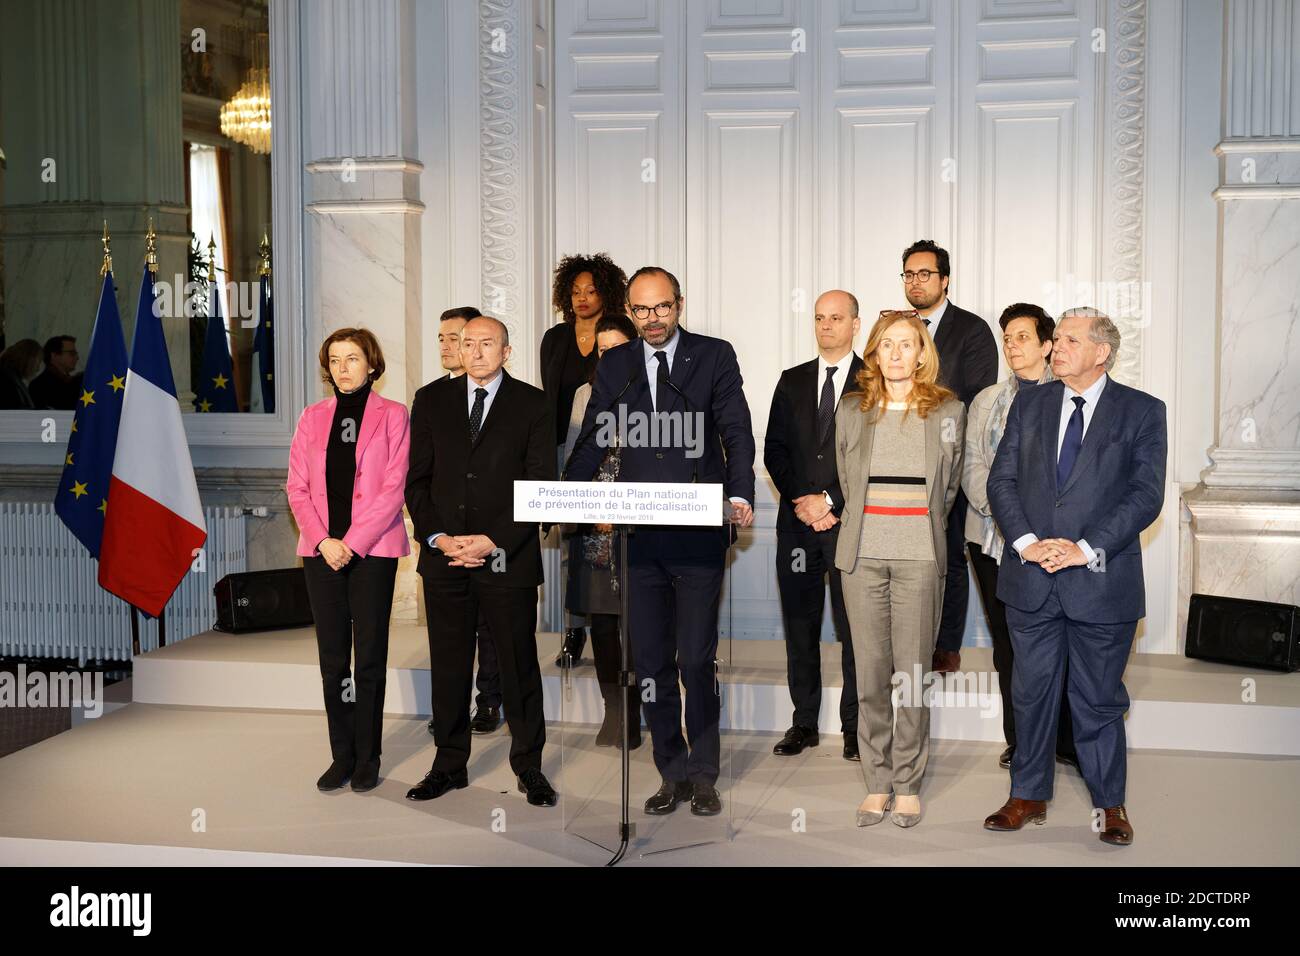 French Prime Minister Edouard Philippe, flanked by members of the government, French Defence Minister Florence Parly, French Interior Minister Gerard Collomb, French Justice Minister Nicole Belloubet, French Minister for the Territorial Cohesion Jacques Mezard, French Minister of Public Action and Accounts Gerald Darmanin, French Sports Minister Laura Flessel, French Minister for Solidarity and Health Agnes Buzyn, French Education Minister Jean-Michel Blanquer, French Junior Minister for the Digital Sector Mounir Mahjoubi and French Minister of Higher Education, Research and Innovation Frederi Stock Photo